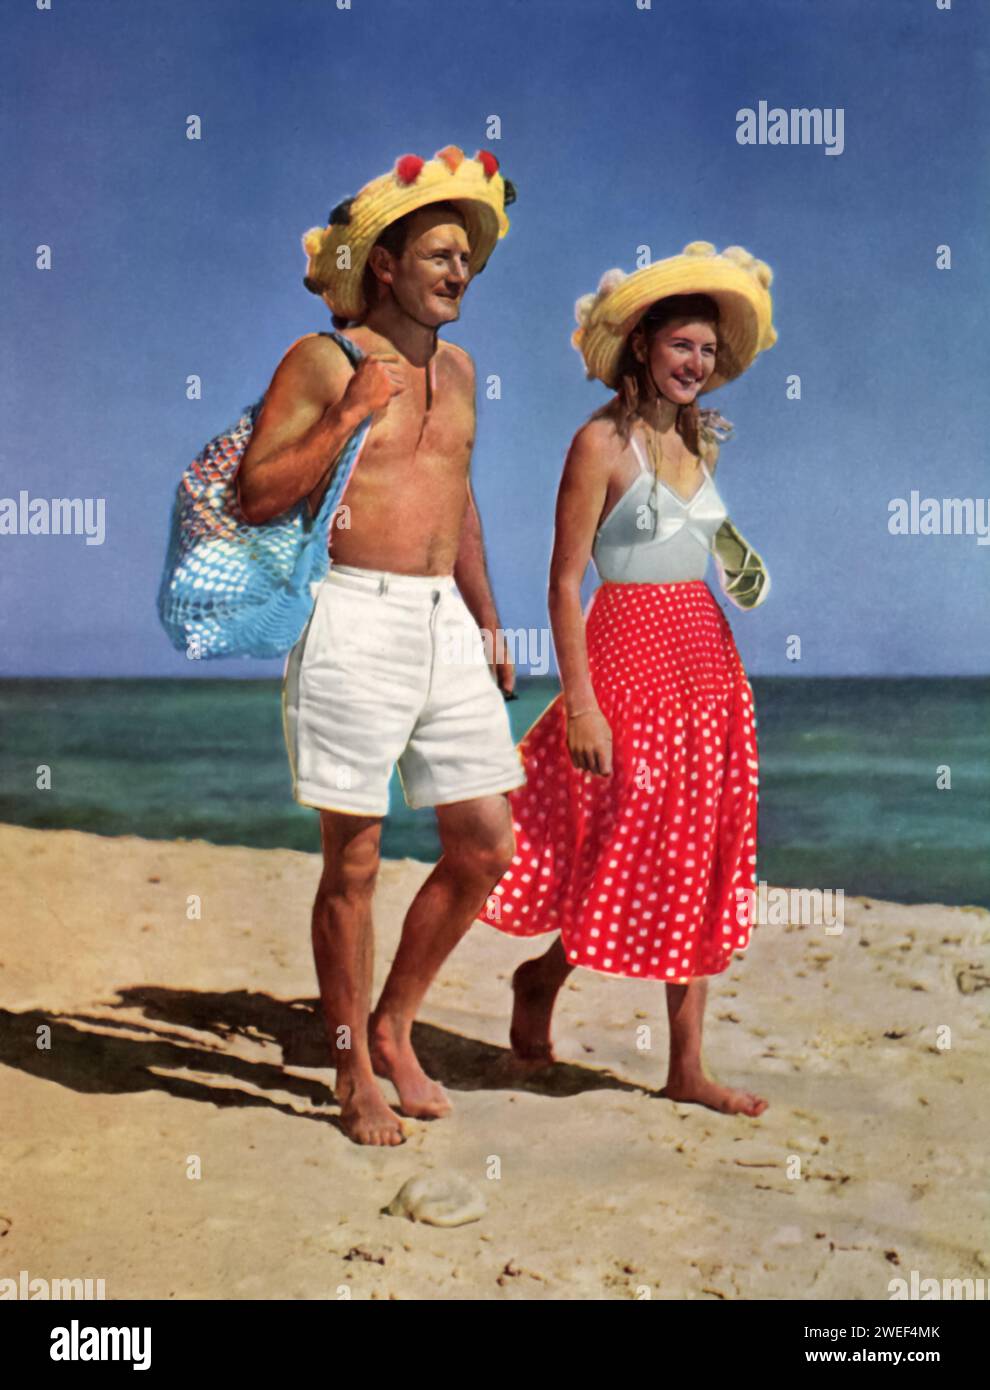 Trevor Howard and Anouk Aimée are featured walking along a Tunisian beach in the film 'The Golden Salamander' (1950). This adventure film has Howard playing David Redfern, an archaeologist who uncovers a smuggling ring in a small Tunisian town, with Anouk portraying the beautiful and mysterious Anna. Stock Photo